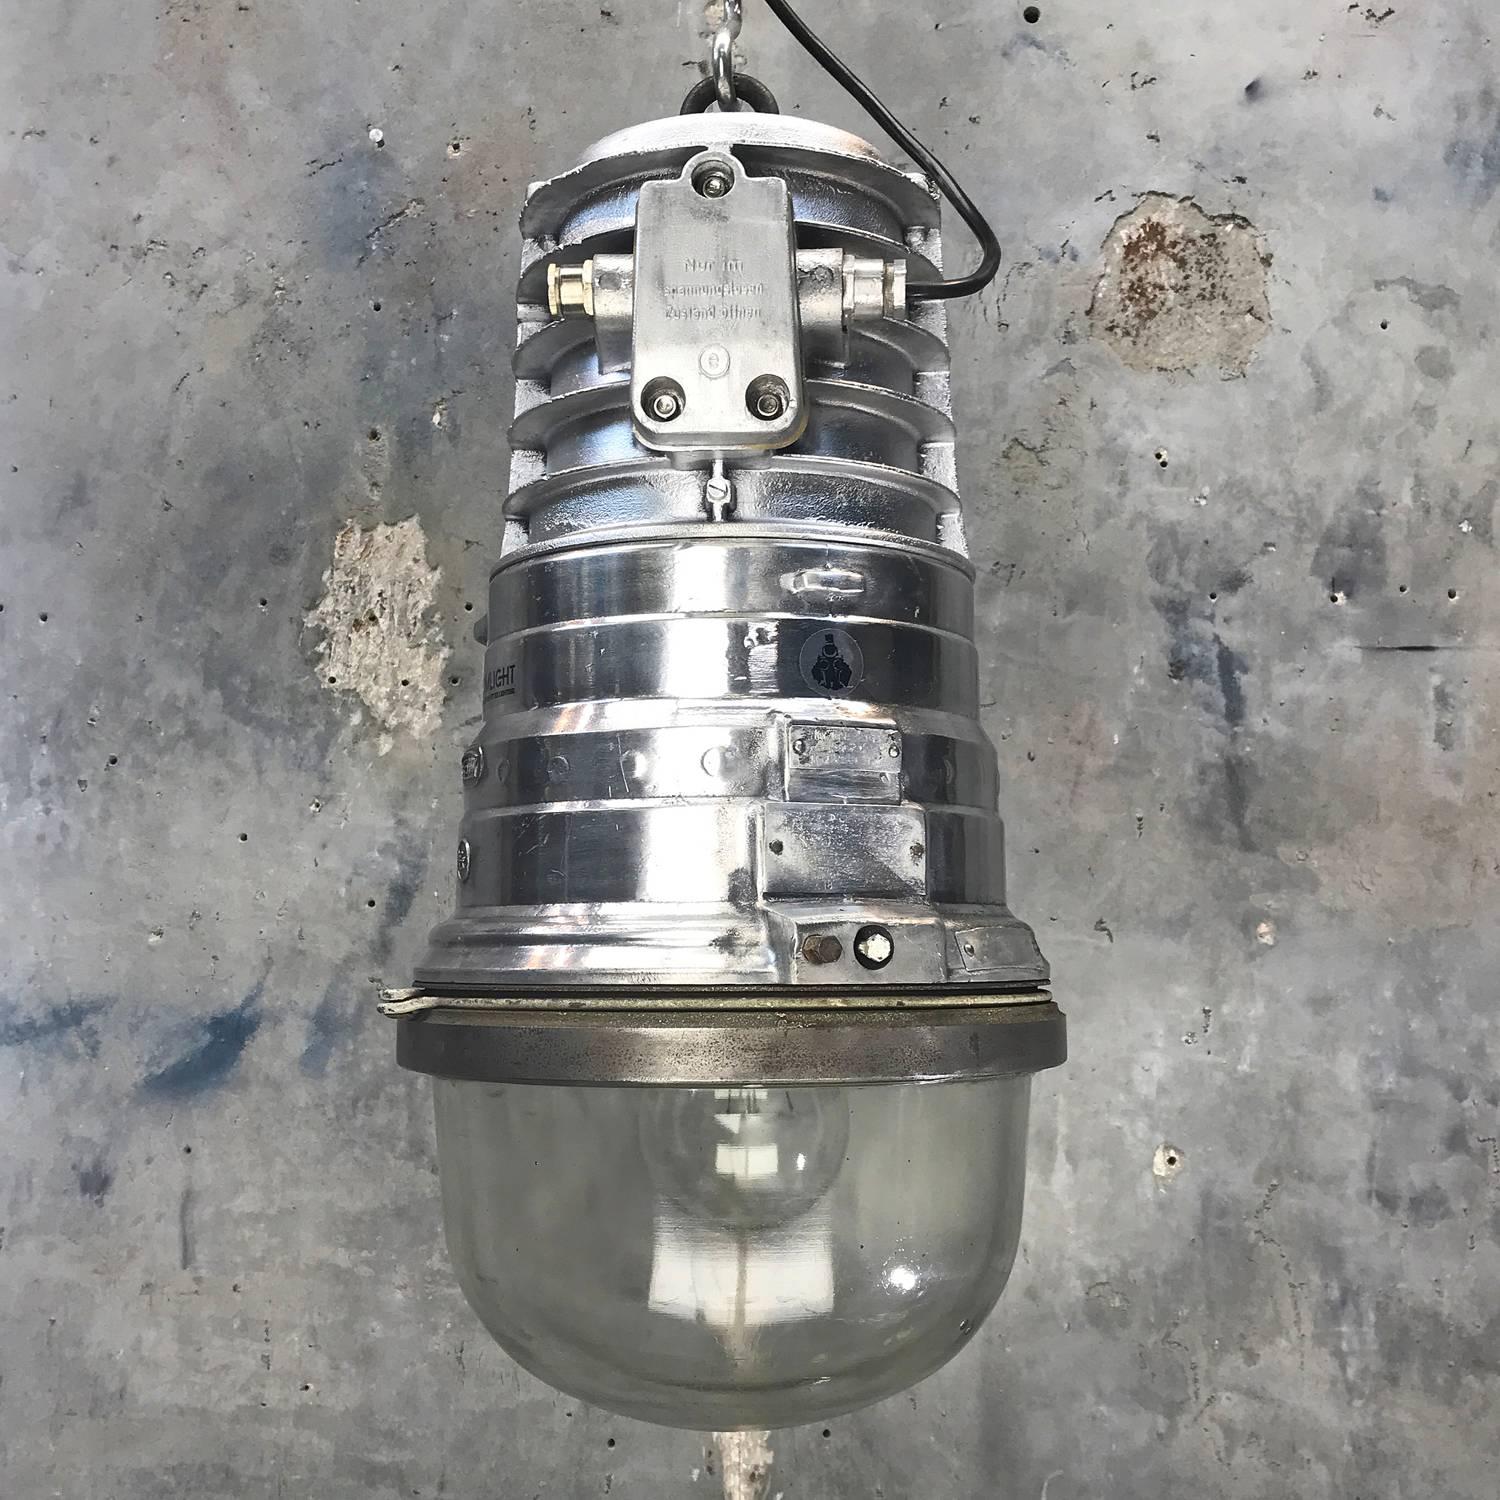 18 kg cast aluminium explosion proof pendant.
If you are looking for an Industrial fitting that is truly unique look no further!
The lamp we have fitted is a 300 watt tungsten / halogen lamp which suits the fixture perfectly in terms of size and